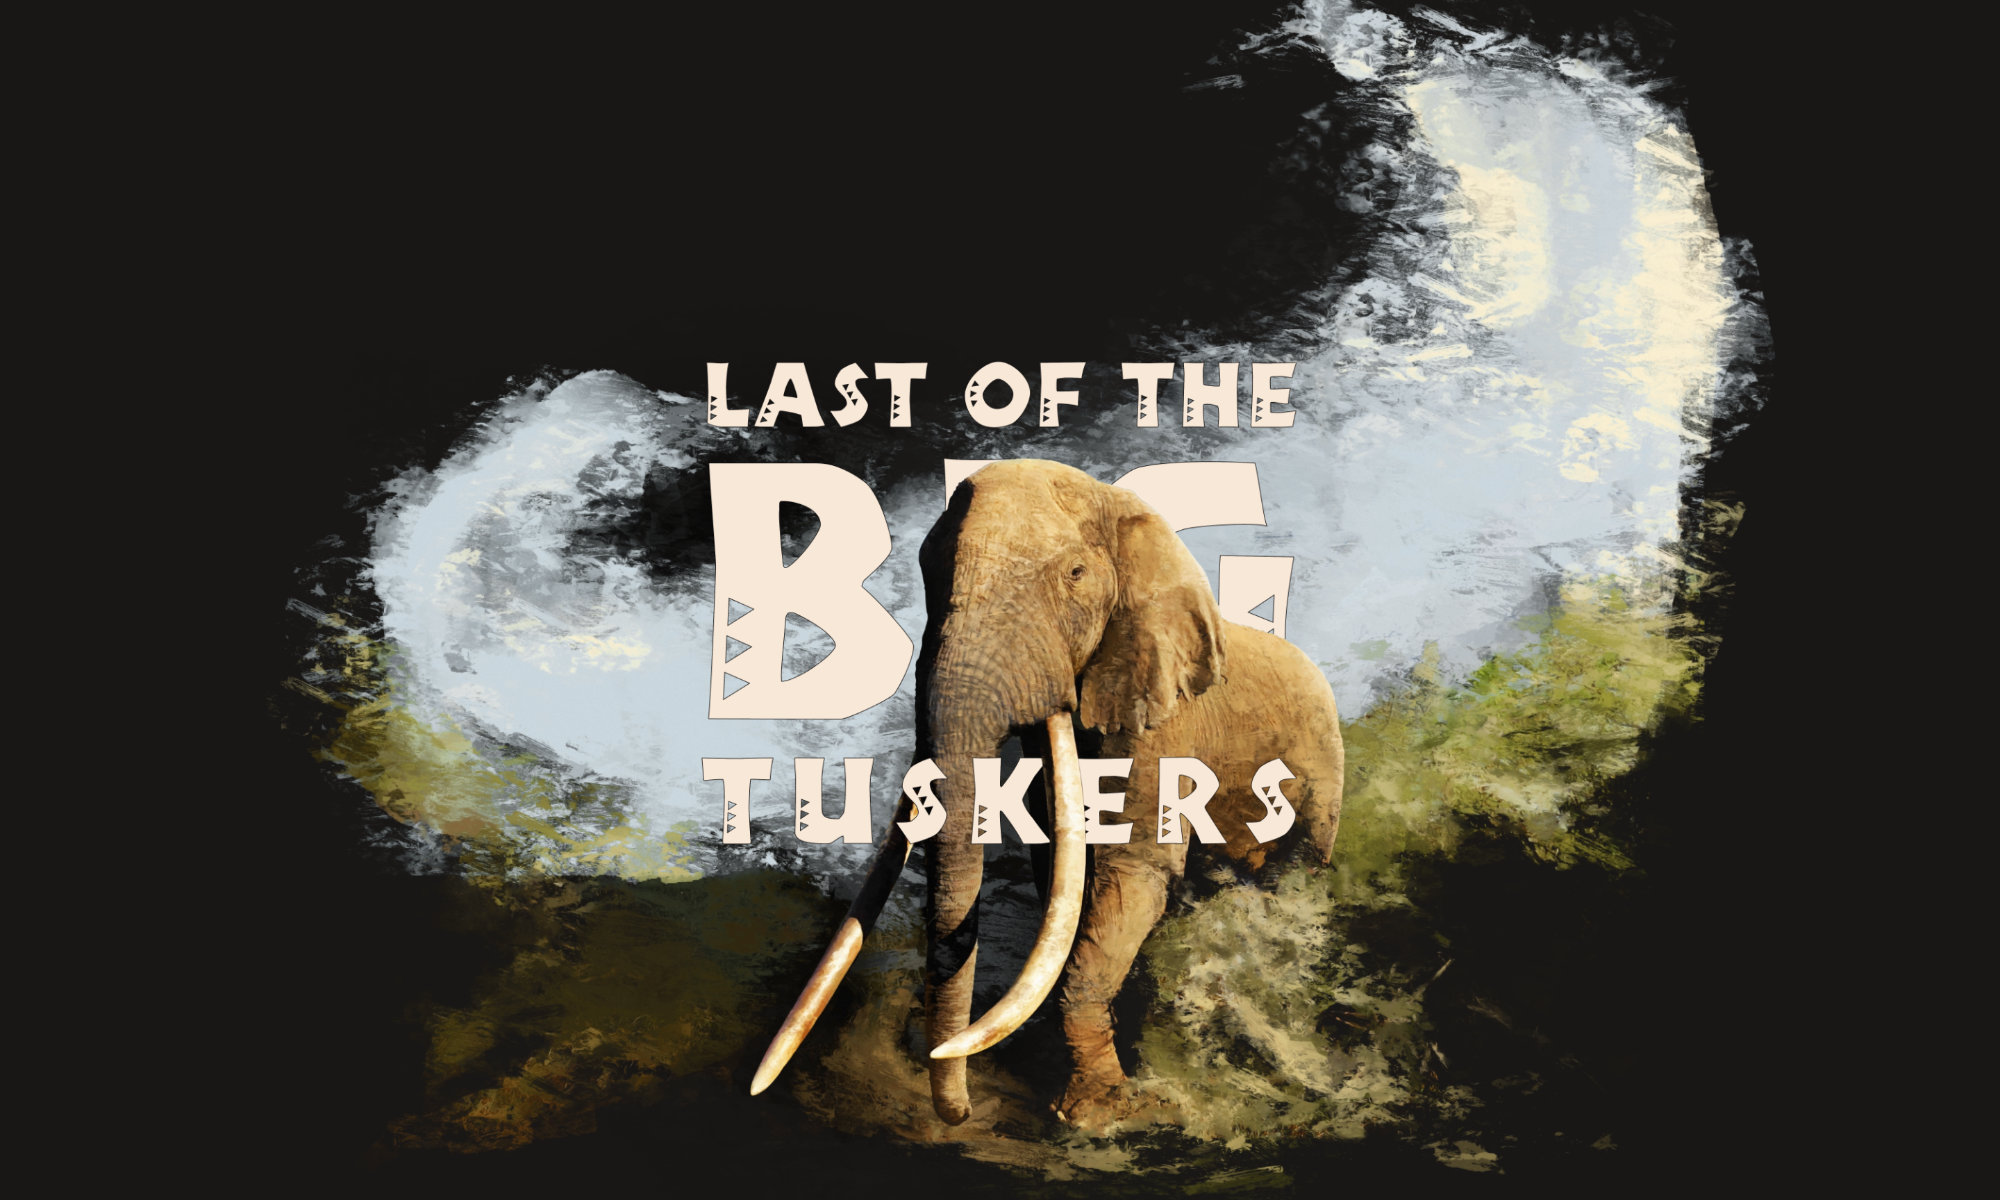 Last of the Big Tuskers – Cover art (2018) © Umboko Productions